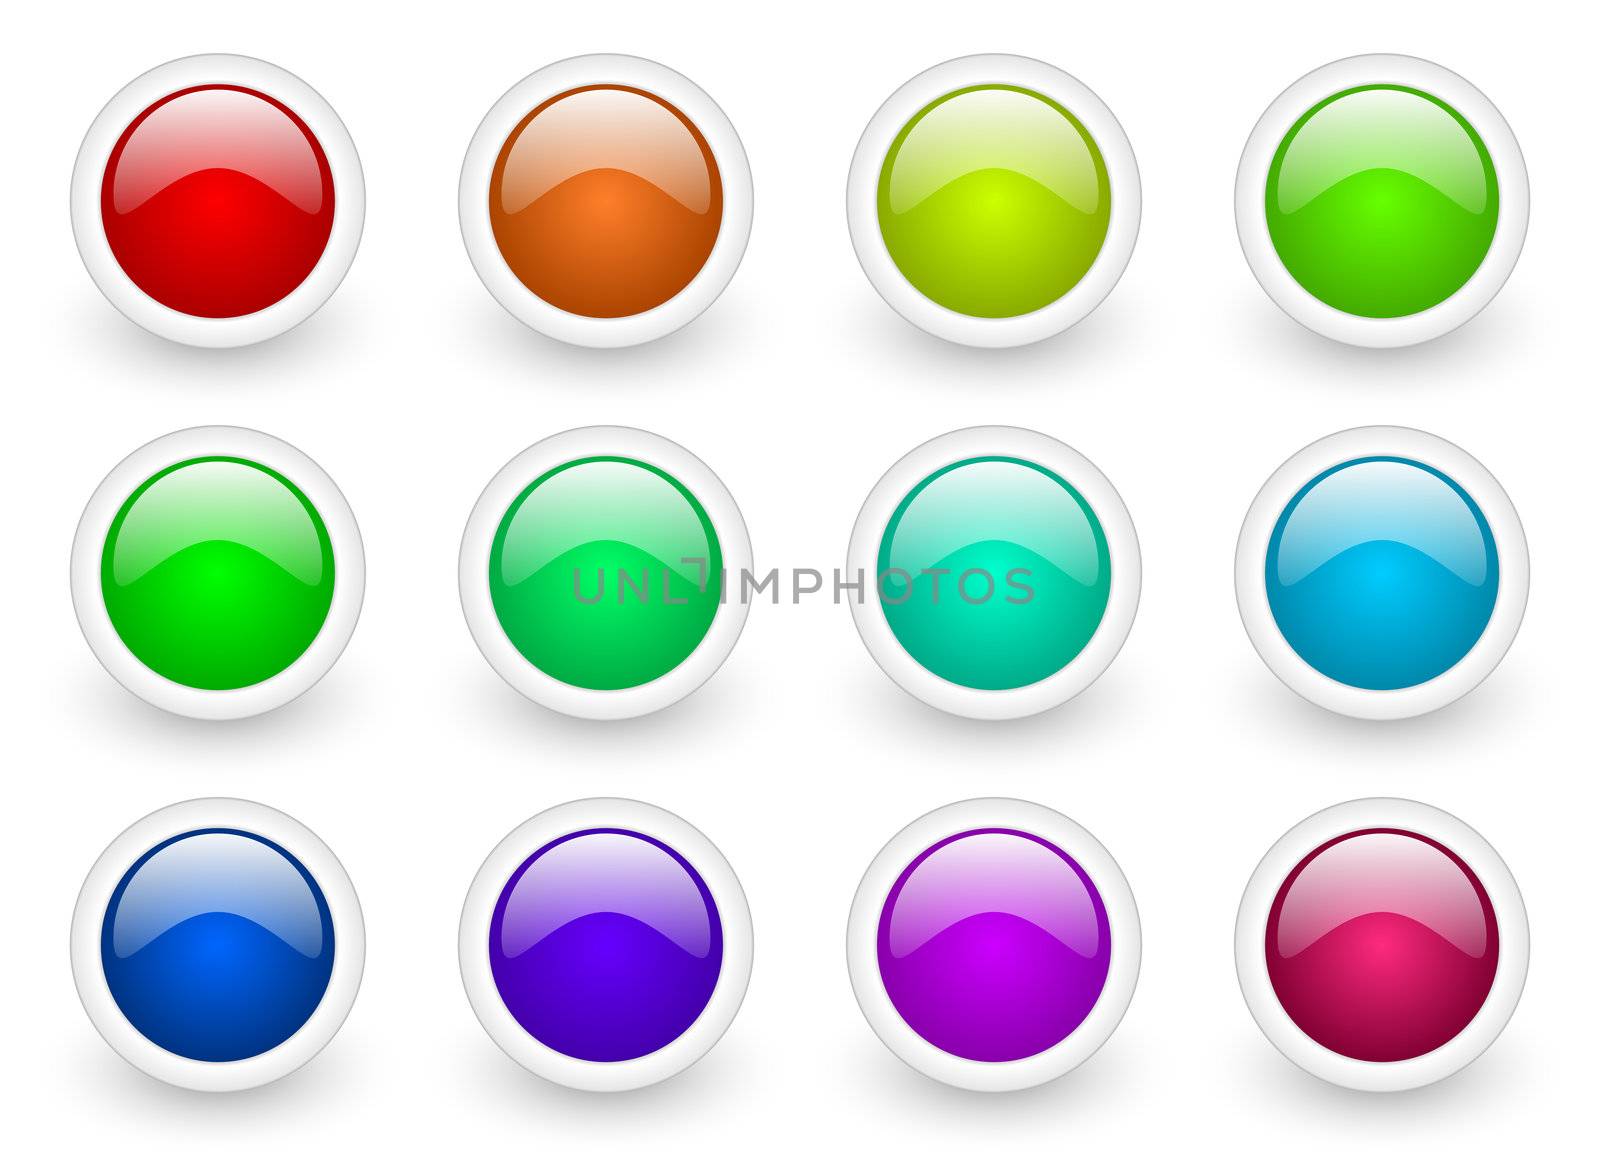 colorful buttons set